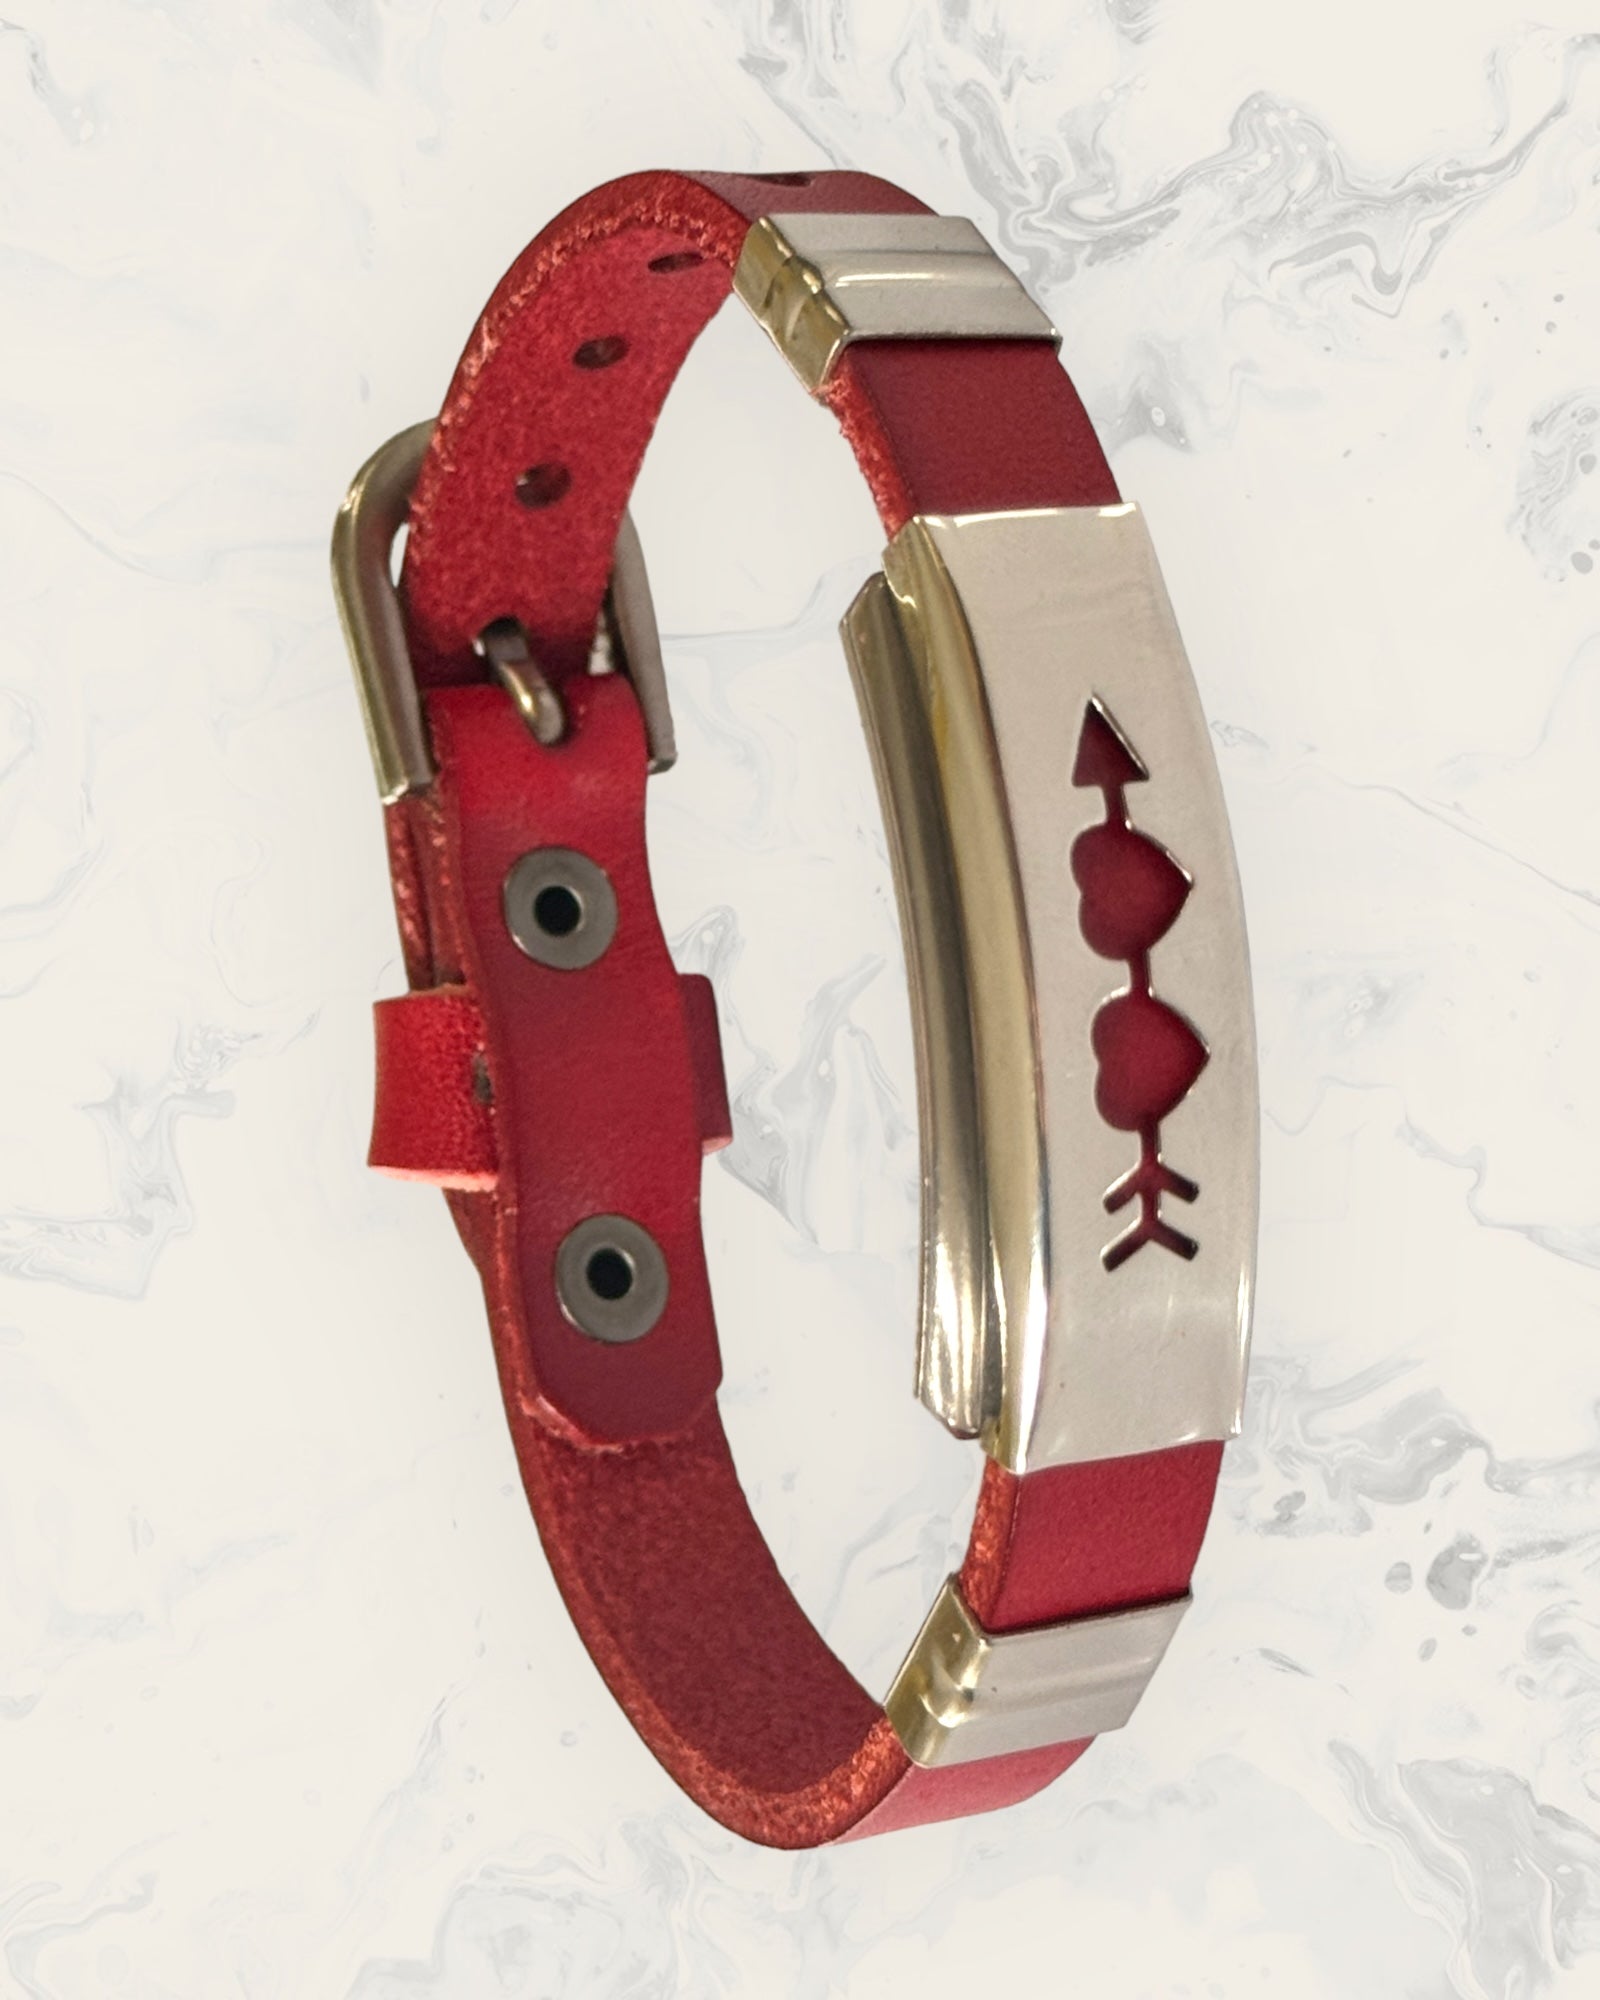 Frequency Jewelry Natural Pain Relief and EMF Protection Bracelet Leather Band Color Red with Two Hearts with an Arrow design on a silver metal slider